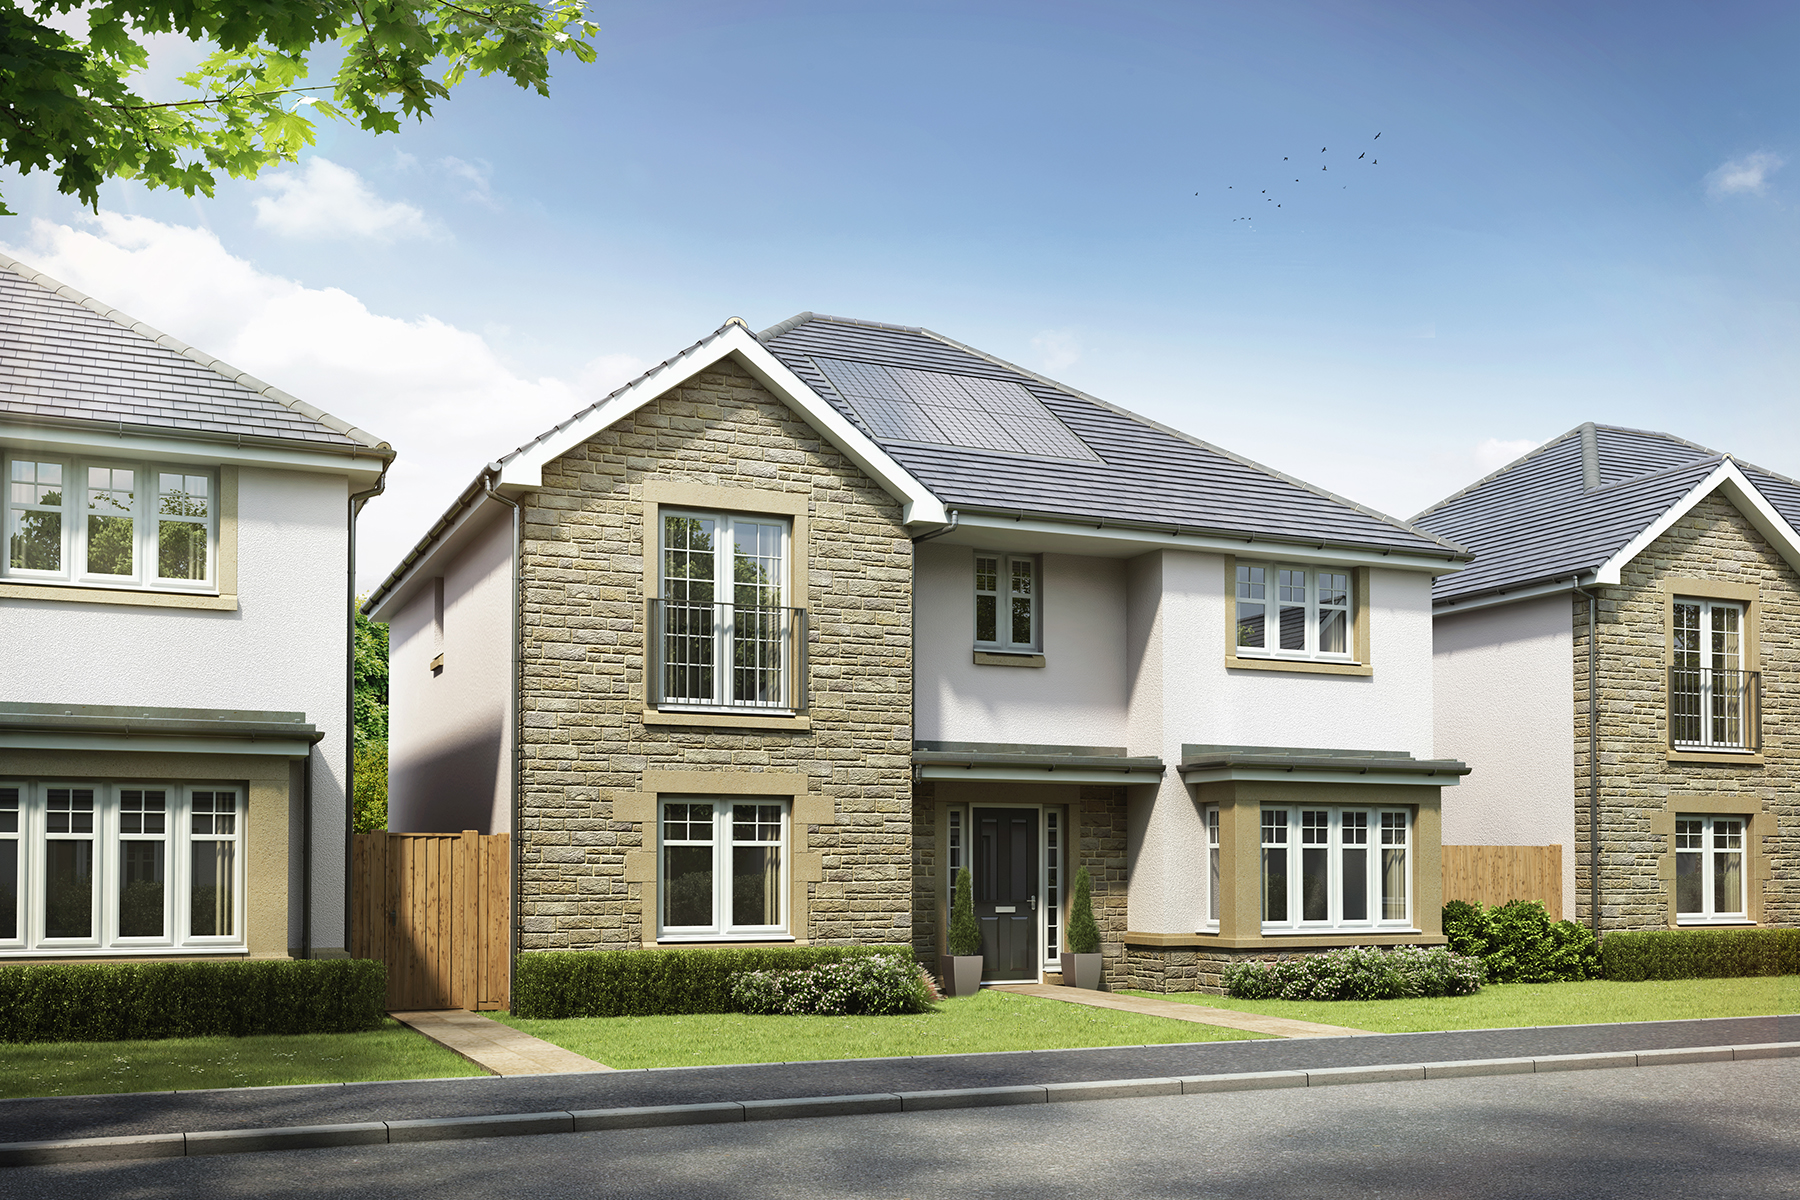 Taylor Wimpey secures planning permission for Maidenhill development